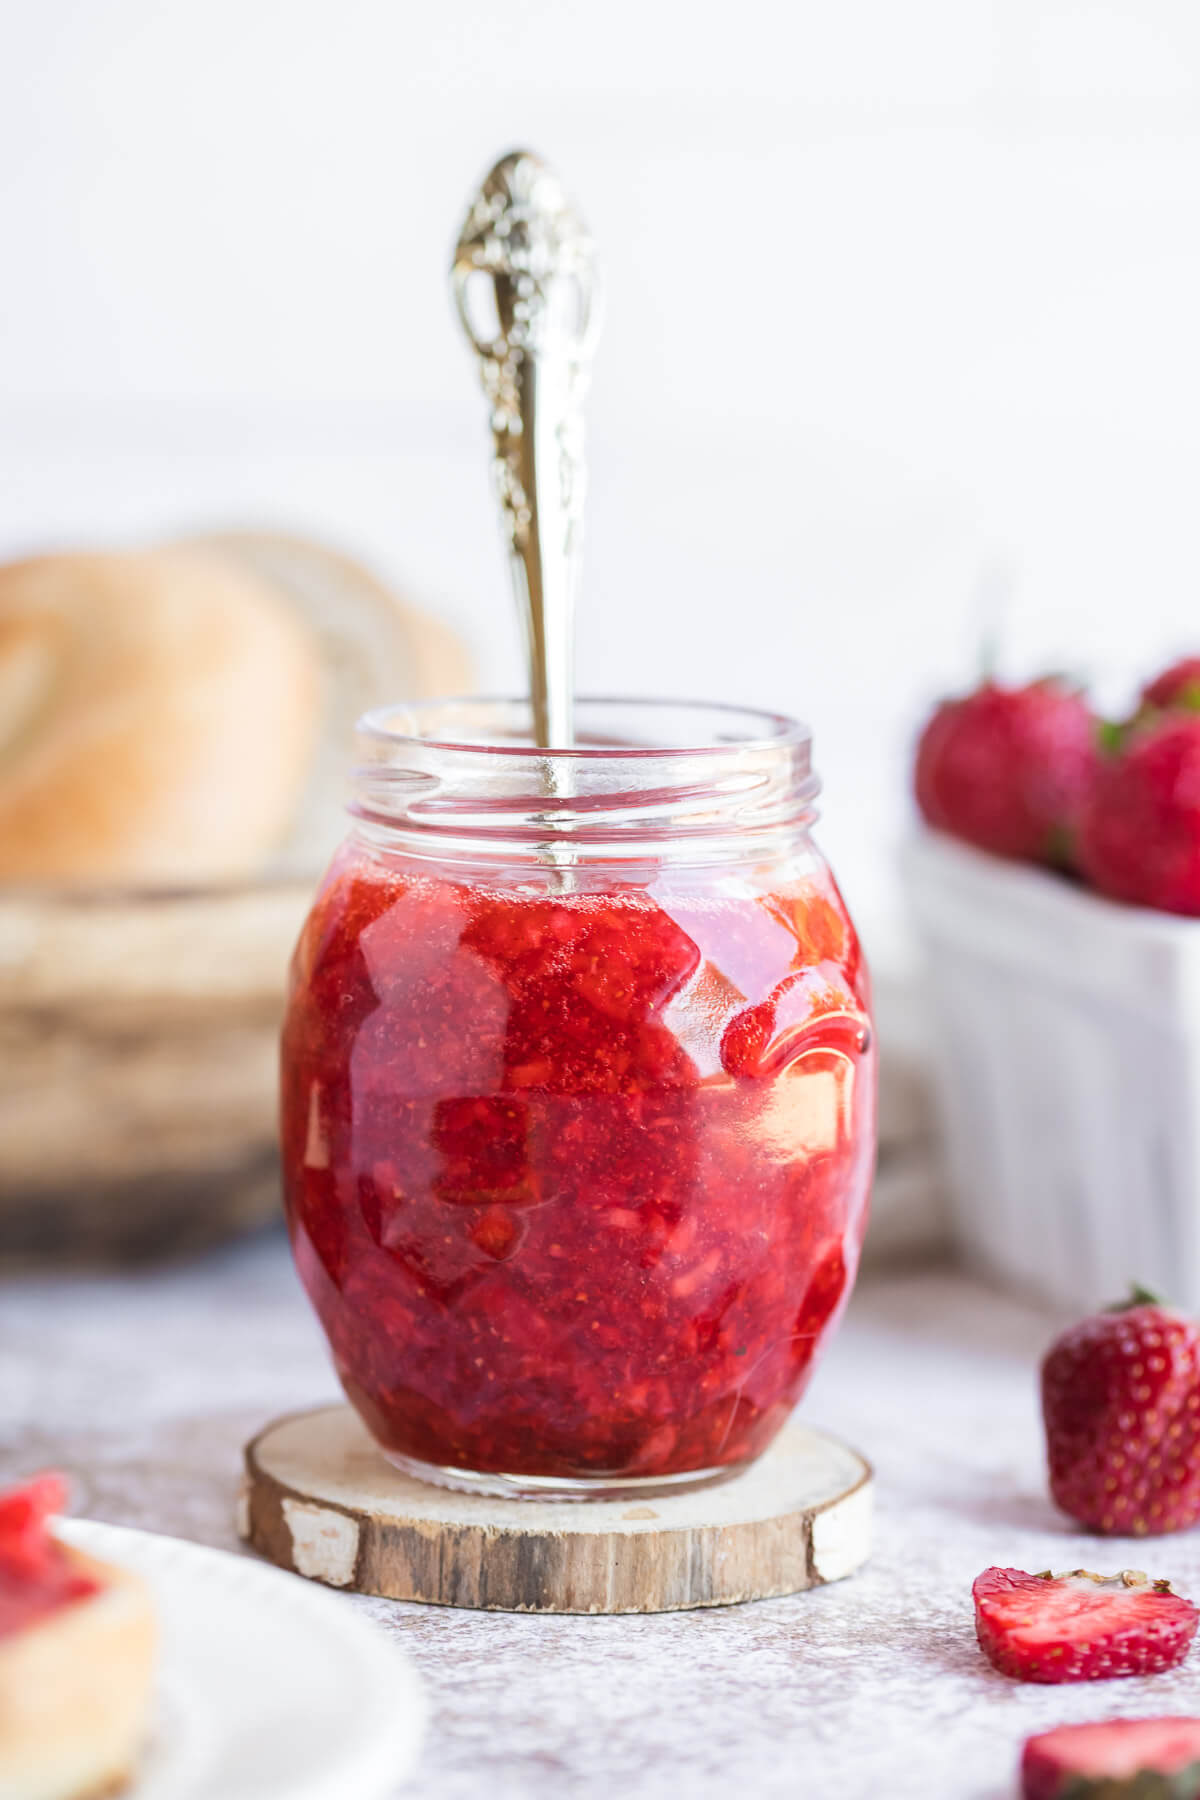 strawberry freezer jam in a glass jar with a spoon on a table.